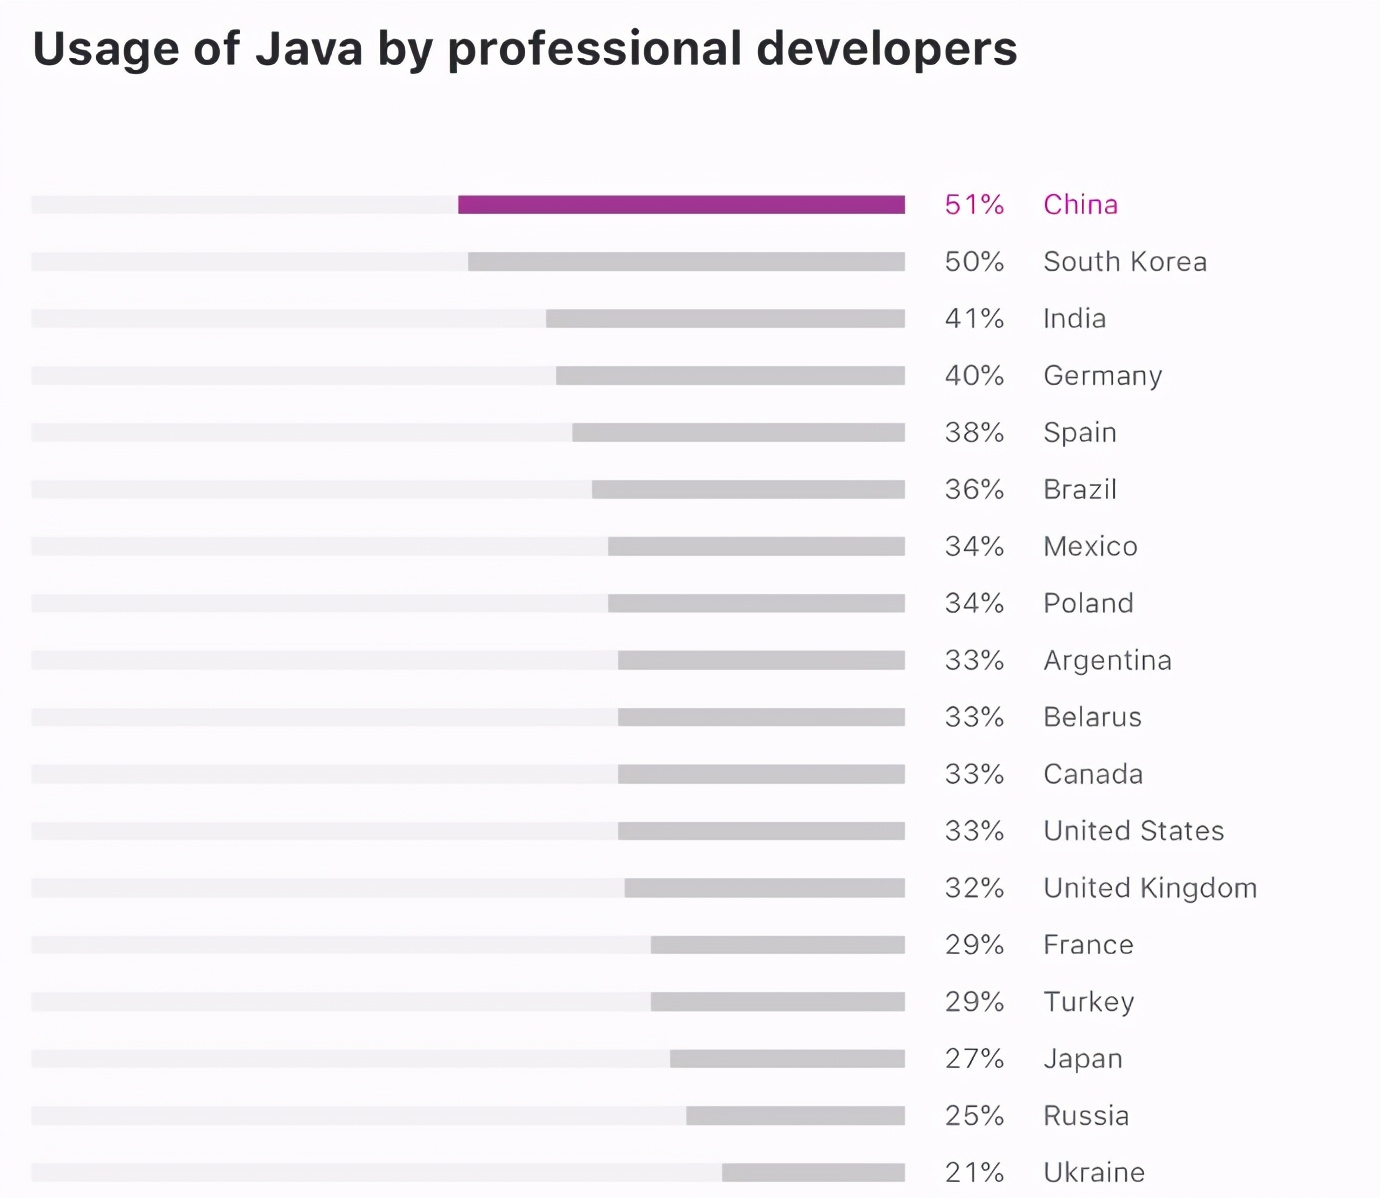 Have you ever seen an architect resume with an annual salary of 120W?  How can java programmers achieve this?